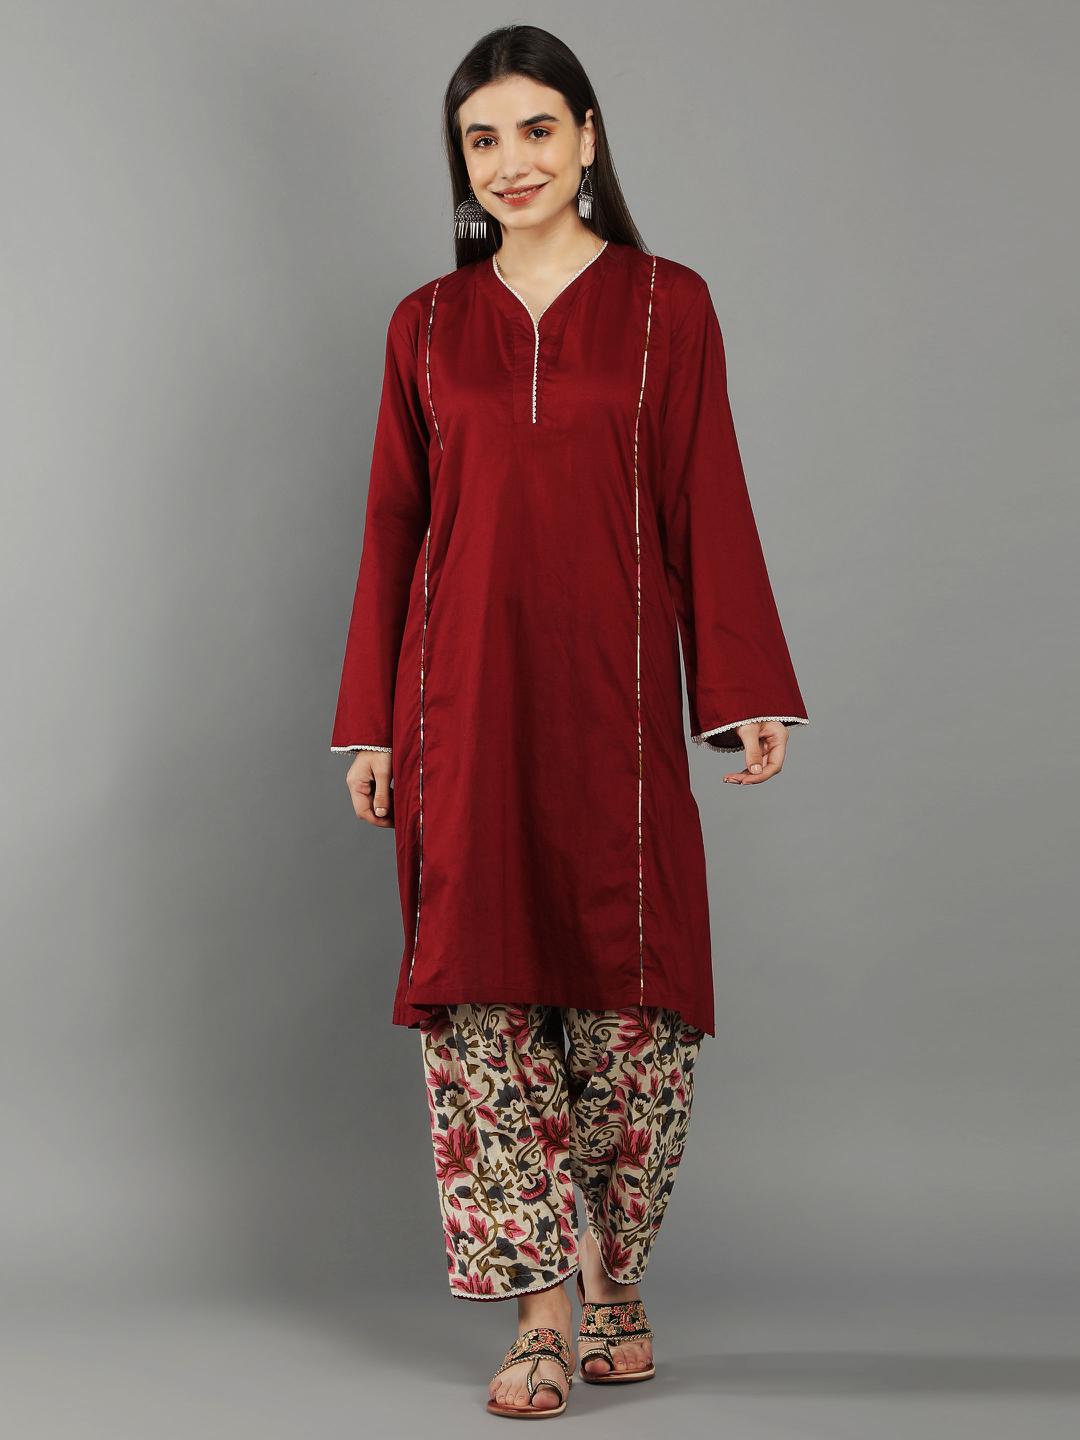 bing-cherry-maroon-v-neck-kurta-in-bell-sleeves-with-straight-pant-11702102WH, Women Indian Ethnic Clothing, Cotton Kurta Set